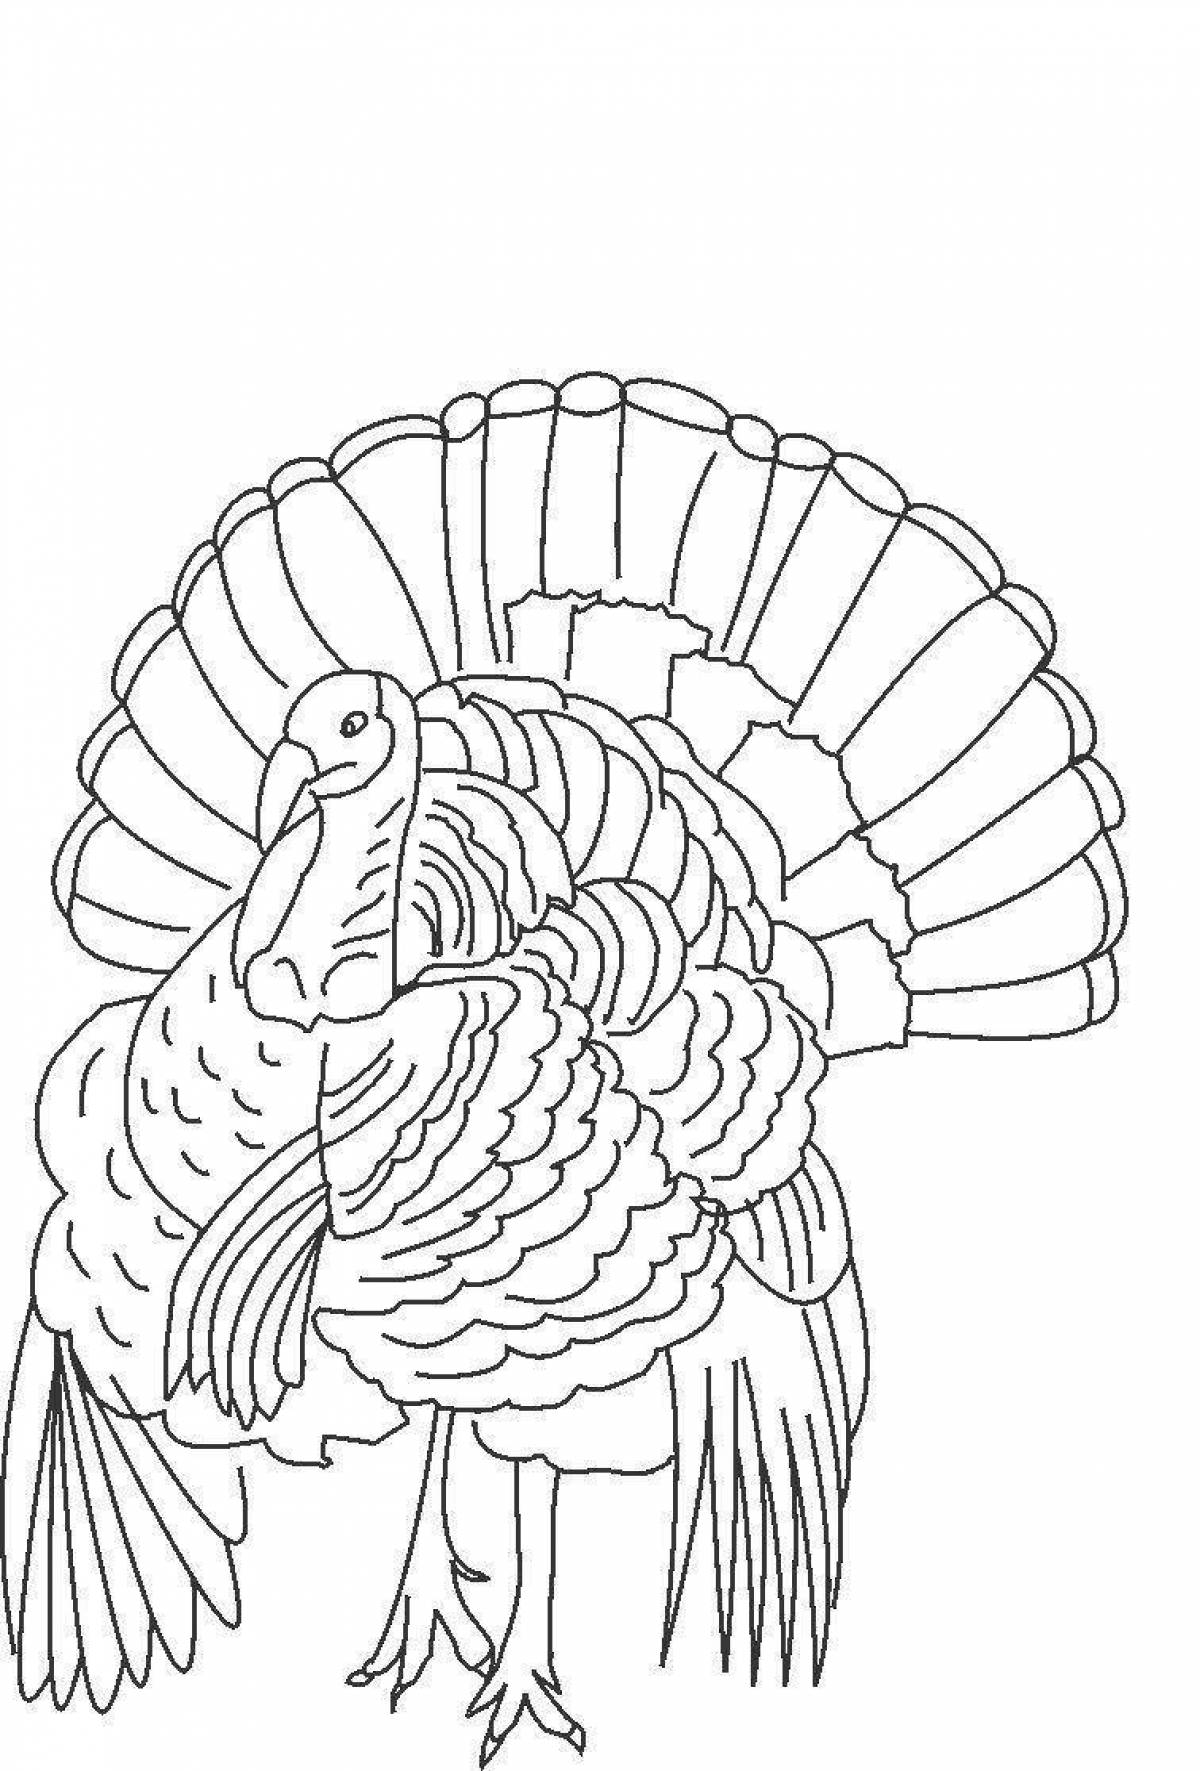 Creative turkey coloring pages for kids